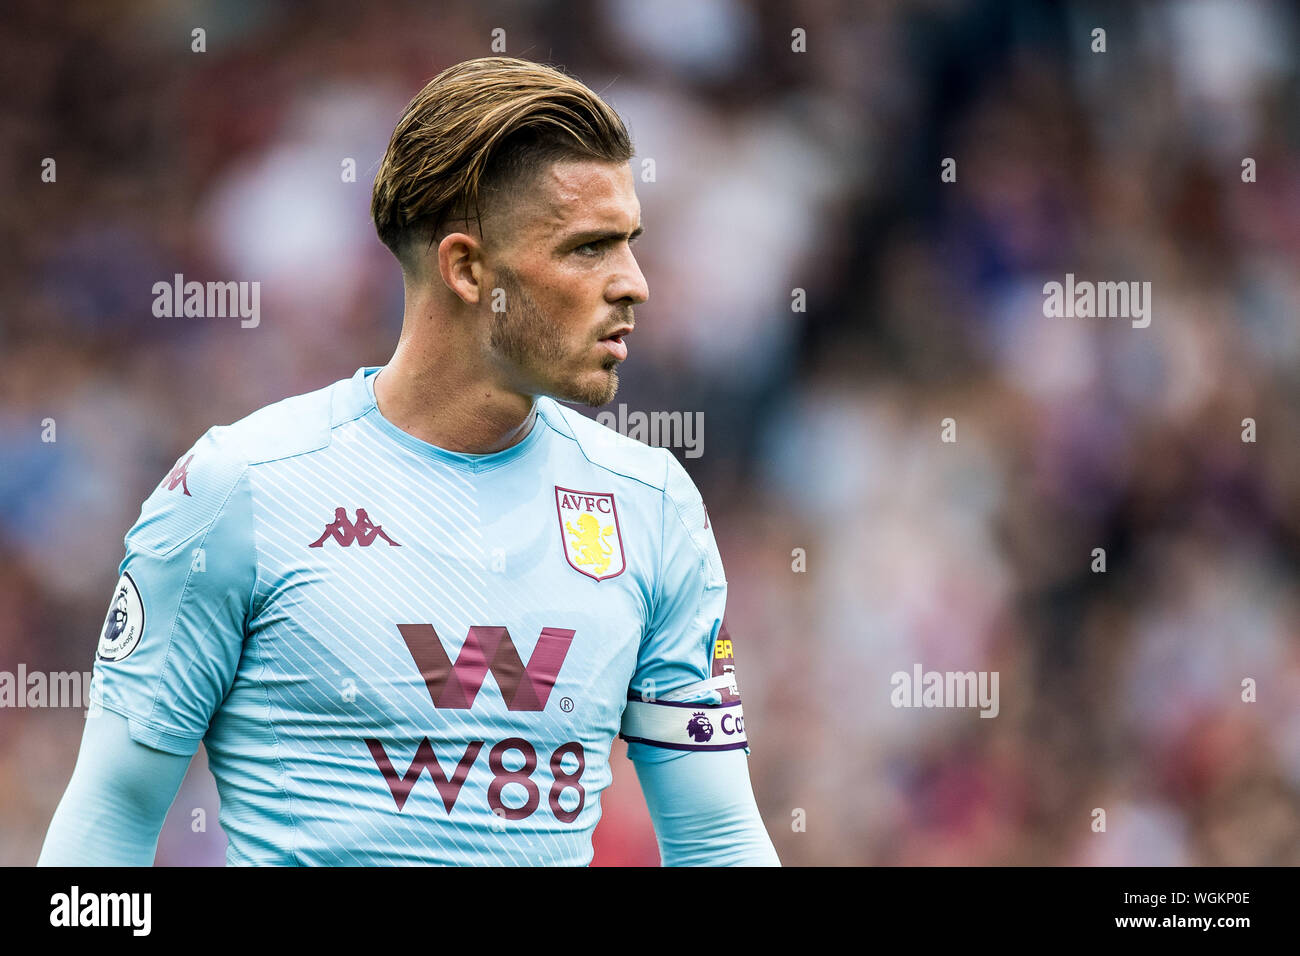 LONDON, ENGLAND - AUGUST 31: Jack Grealish of Aston Villa looks on during the Premier League match between Crystal Palace and Aston Villa at Selhurst Park on August 31, 2019 in London, United Kingdom. (Photo by Sebastian Frej/MB Media) Stock Photo